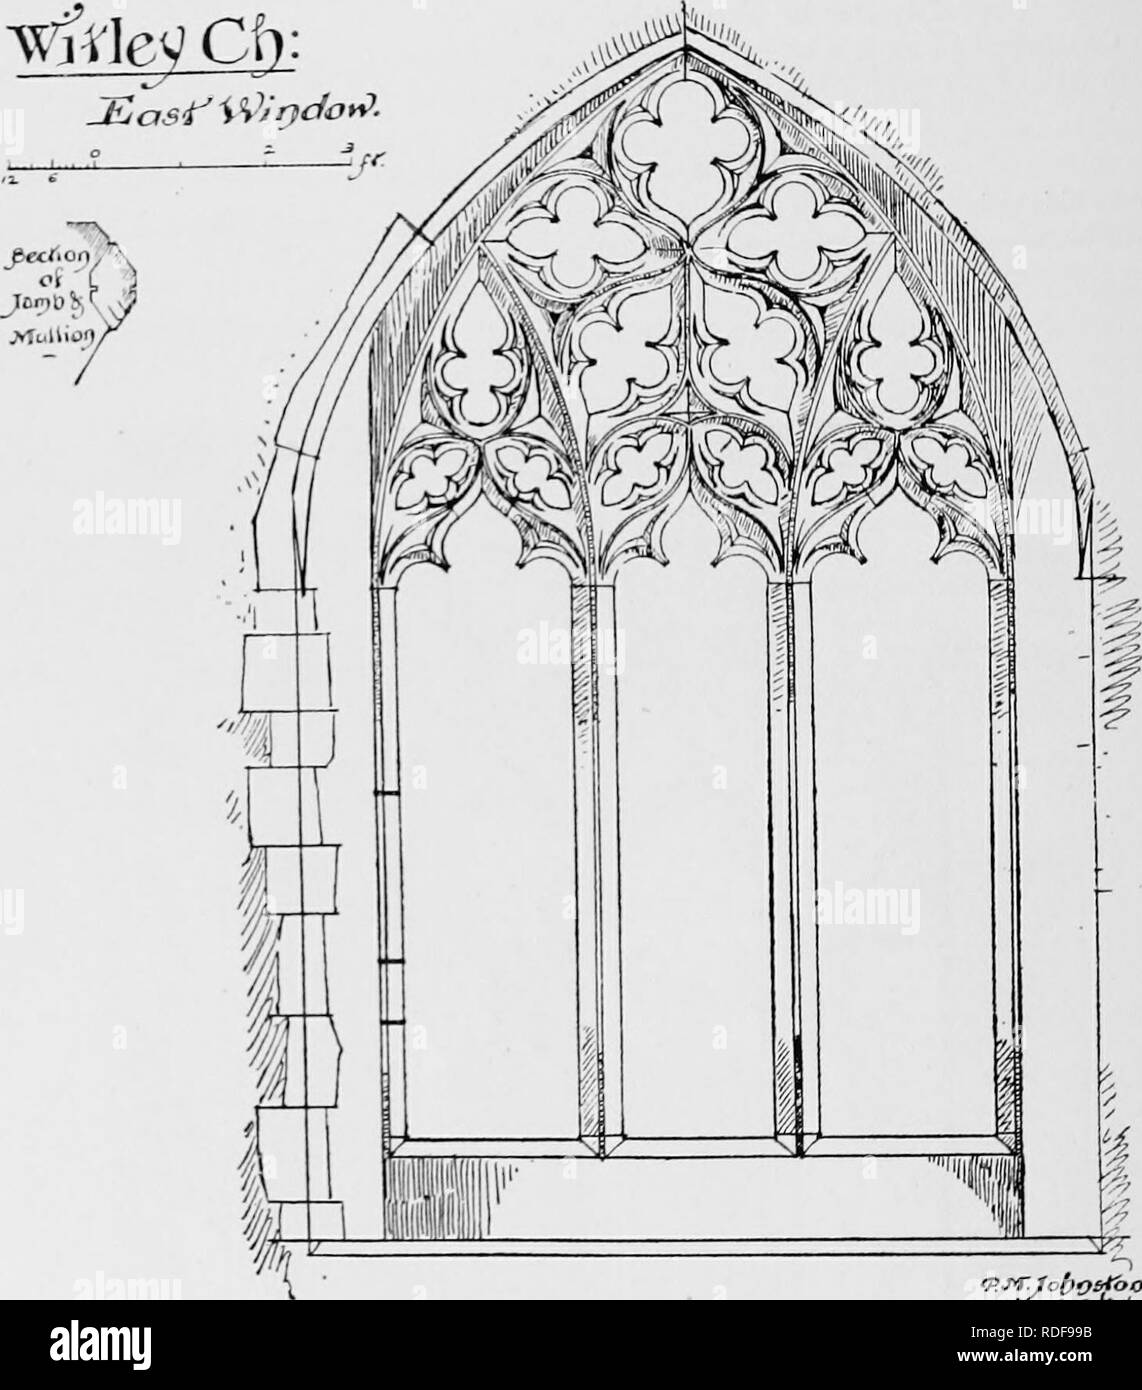 . The Victoria history of the county of Surrey. Natural history. A HISTORY OF SURREY BO0KH.M. GKBXT.-Chancel with it, windows, ^^,^. One of these, on the north, is , low side Boo^ham&quot; L.rrLE.-Low side window south of chancel. CHALDON.-Window in east wall of south chapel bargeboard. CHiDDiNGFOLDâWindows in south aisle of nave, c, 133Â°. ^&quot;f PÂ°''&quot; &quot;*''&quot; Â« Clandon. WEST.-East window and windows in nave. c. 1350. CoBHAM.âWindows in north chapel, f. 1330- CoMPTON.-East window and piscina in south aisle, c. 1330. EcHAM.-Parts of church, now destroyed, dated 1327- Frensham. Stock Photo